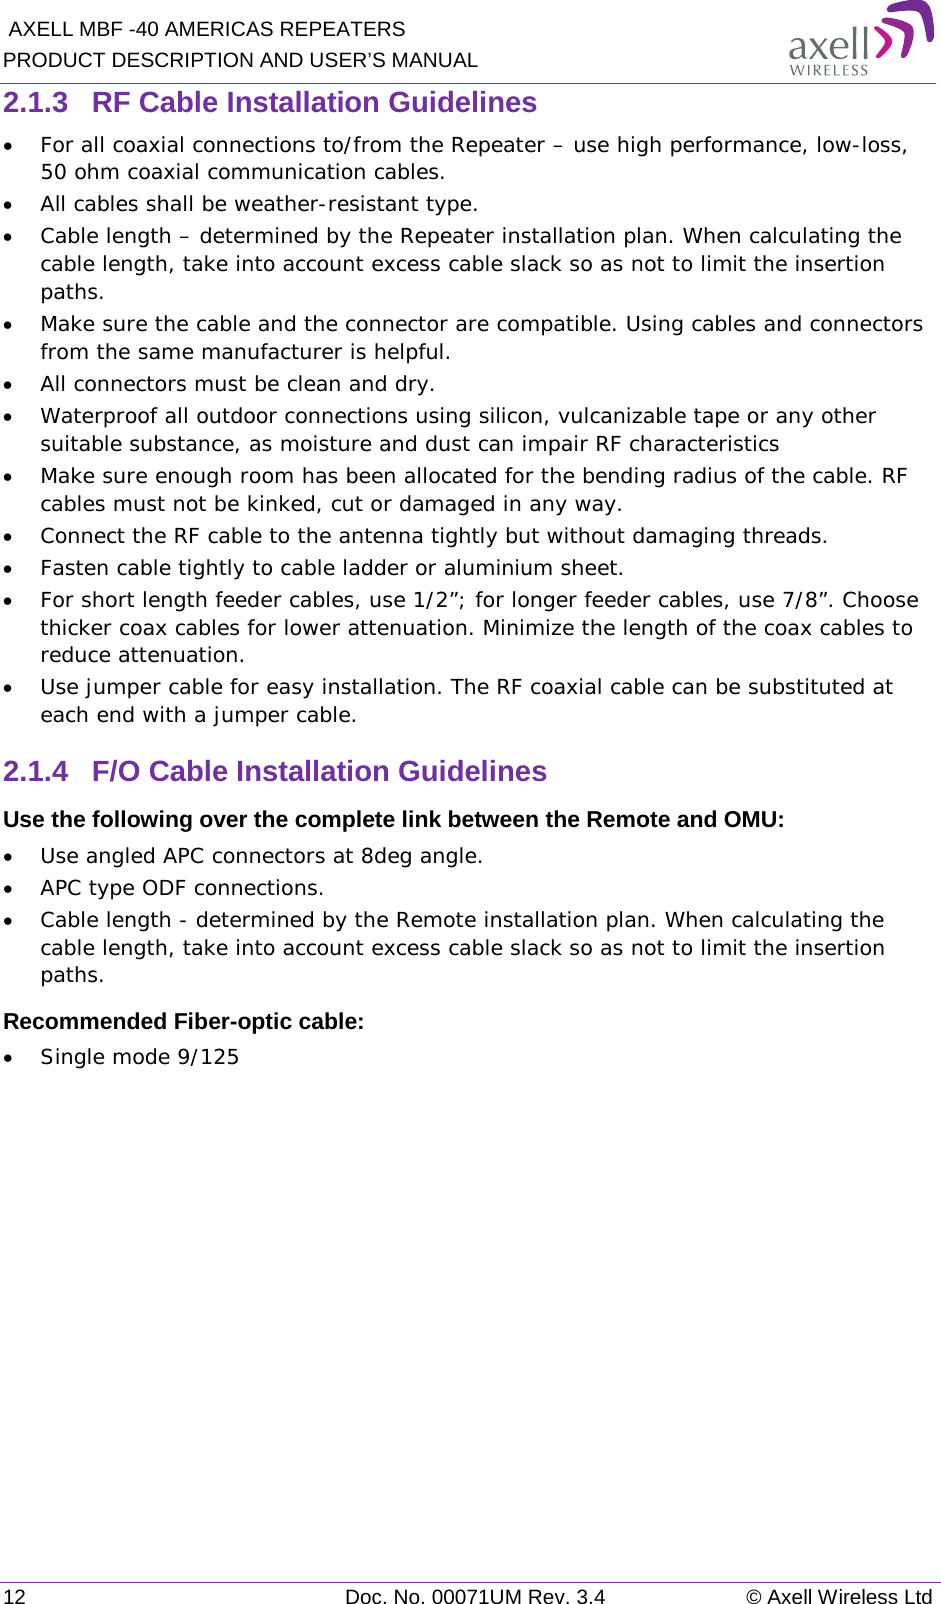  AXELL MBF -40 AMERICAS REPEATERS PRODUCT DESCRIPTION AND USER’S MANUAL 12 Doc. No. 00071UM Rev. 3.4 © Axell Wireless Ltd 2.1.3  RF Cable Installation Guidelines • For all coaxial connections to/from the Repeater – use high performance, low-loss, 50 ohm coaxial communication cables. • All cables shall be weather-resistant type. • Cable length – determined by the Repeater installation plan. When calculating the cable length, take into account excess cable slack so as not to limit the insertion paths. • Make sure the cable and the connector are compatible. Using cables and connectors from the same manufacturer is helpful. • All connectors must be clean and dry. • Waterproof all outdoor connections using silicon, vulcanizable tape or any other suitable substance, as moisture and dust can impair RF characteristics • Make sure enough room has been allocated for the bending radius of the cable. RF cables must not be kinked, cut or damaged in any way. • Connect the RF cable to the antenna tightly but without damaging threads. • Fasten cable tightly to cable ladder or aluminium sheet. • For short length feeder cables, use 1/2”; for longer feeder cables, use 7/8”. Choose thicker coax cables for lower attenuation. Minimize the length of the coax cables to reduce attenuation. • Use jumper cable for easy installation. The RF coaxial cable can be substituted at each end with a jumper cable. 2.1.4  F/O Cable Installation Guidelines Use the following over the complete link between the Remote and OMU: • Use angled APC connectors at 8deg angle. • APC type ODF connections. • Cable length - determined by the Remote installation plan. When calculating the cable length, take into account excess cable slack so as not to limit the insertion paths. Recommended Fiber-optic cable:  • Single mode 9/125   